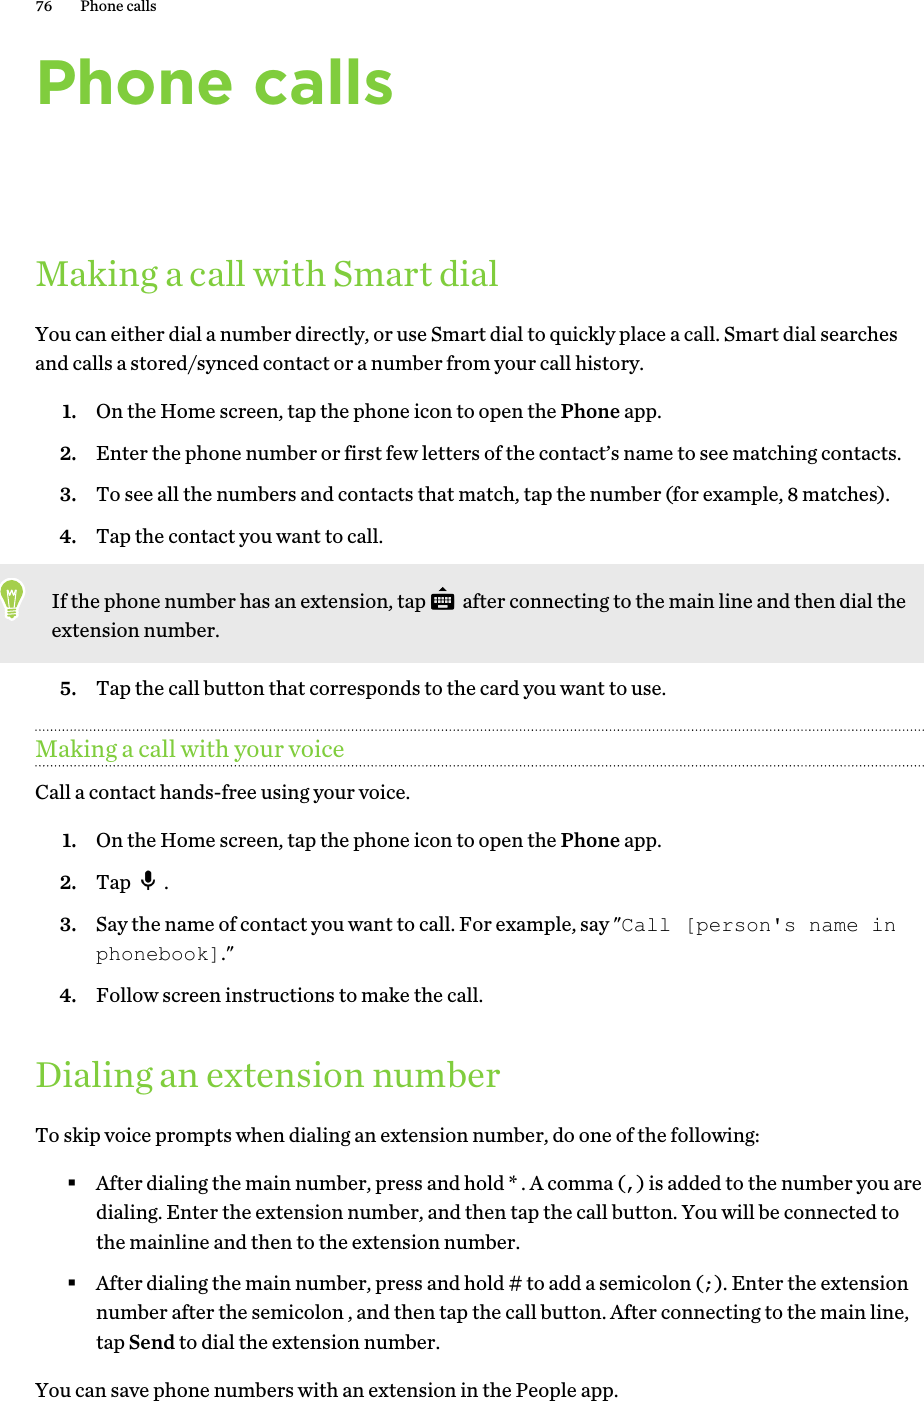 Phone callsMaking a call with Smart dialYou can either dial a number directly, or use Smart dial to quickly place a call. Smart dial searchesand calls a stored/synced contact or a number from your call history.1. On the Home screen, tap the phone icon to open the Phone app.2. Enter the phone number or first few letters of the contact’s name to see matching contacts.3. To see all the numbers and contacts that match, tap the number (for example, 8 matches).4. Tap the contact you want to call. If the phone number has an extension, tap   after connecting to the main line and then dial theextension number.5. Tap the call button that corresponds to the card you want to use.Making a call with your voiceCall a contact hands-free using your voice.1. On the Home screen, tap the phone icon to open the Phone app.2. Tap  .3. Say the name of contact you want to call. For example, say &quot;Call [person&apos;s name inphonebook].&quot;4. Follow screen instructions to make the call.Dialing an extension numberTo skip voice prompts when dialing an extension number, do one of the following:§After dialing the main number, press and hold * . A comma (,) is added to the number you aredialing. Enter the extension number, and then tap the call button. You will be connected tothe mainline and then to the extension number.§After dialing the main number, press and hold # to add a semicolon (;). Enter the extensionnumber after the semicolon , and then tap the call button. After connecting to the main line,tap Send to dial the extension number.You can save phone numbers with an extension in the People app.76 Phone calls